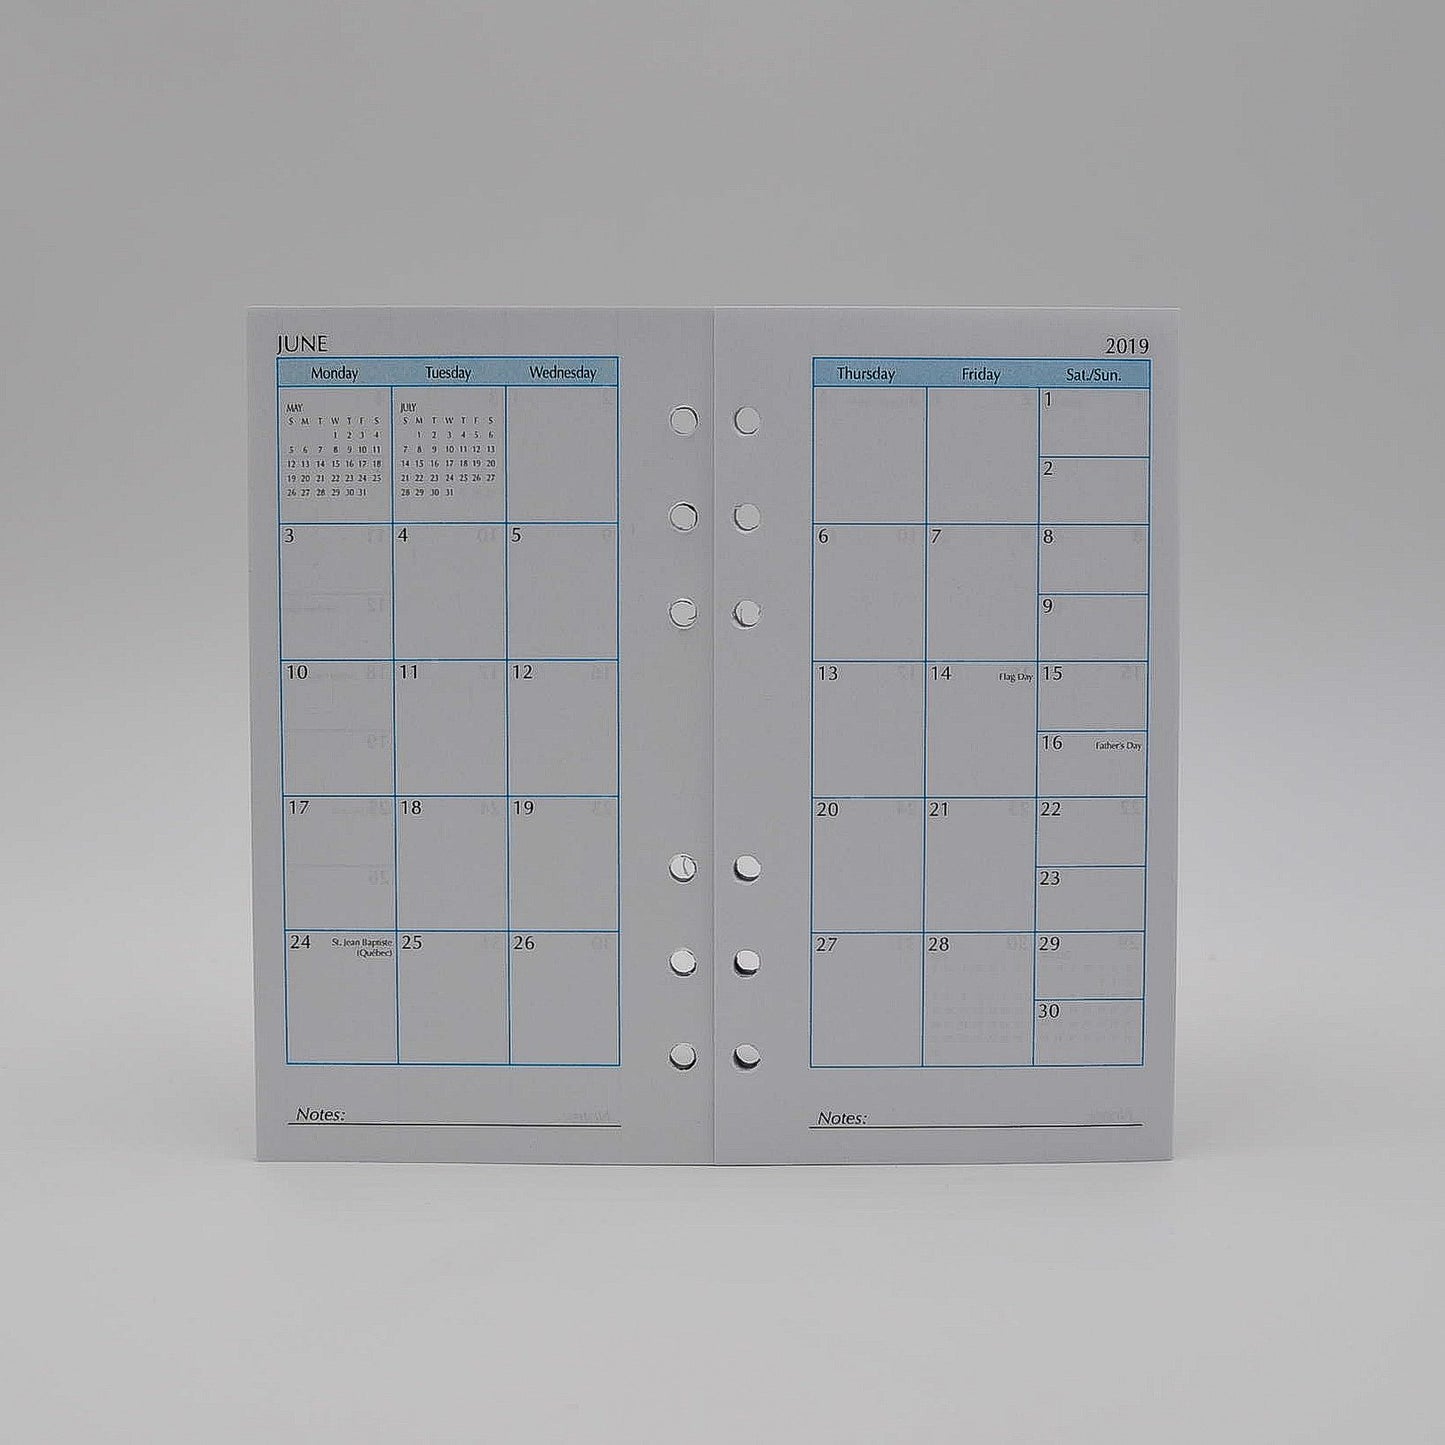 McCarthy Collection: MW46P6 3-3/4" x 6-3/4" 6-hole Planner (with supplemental section)